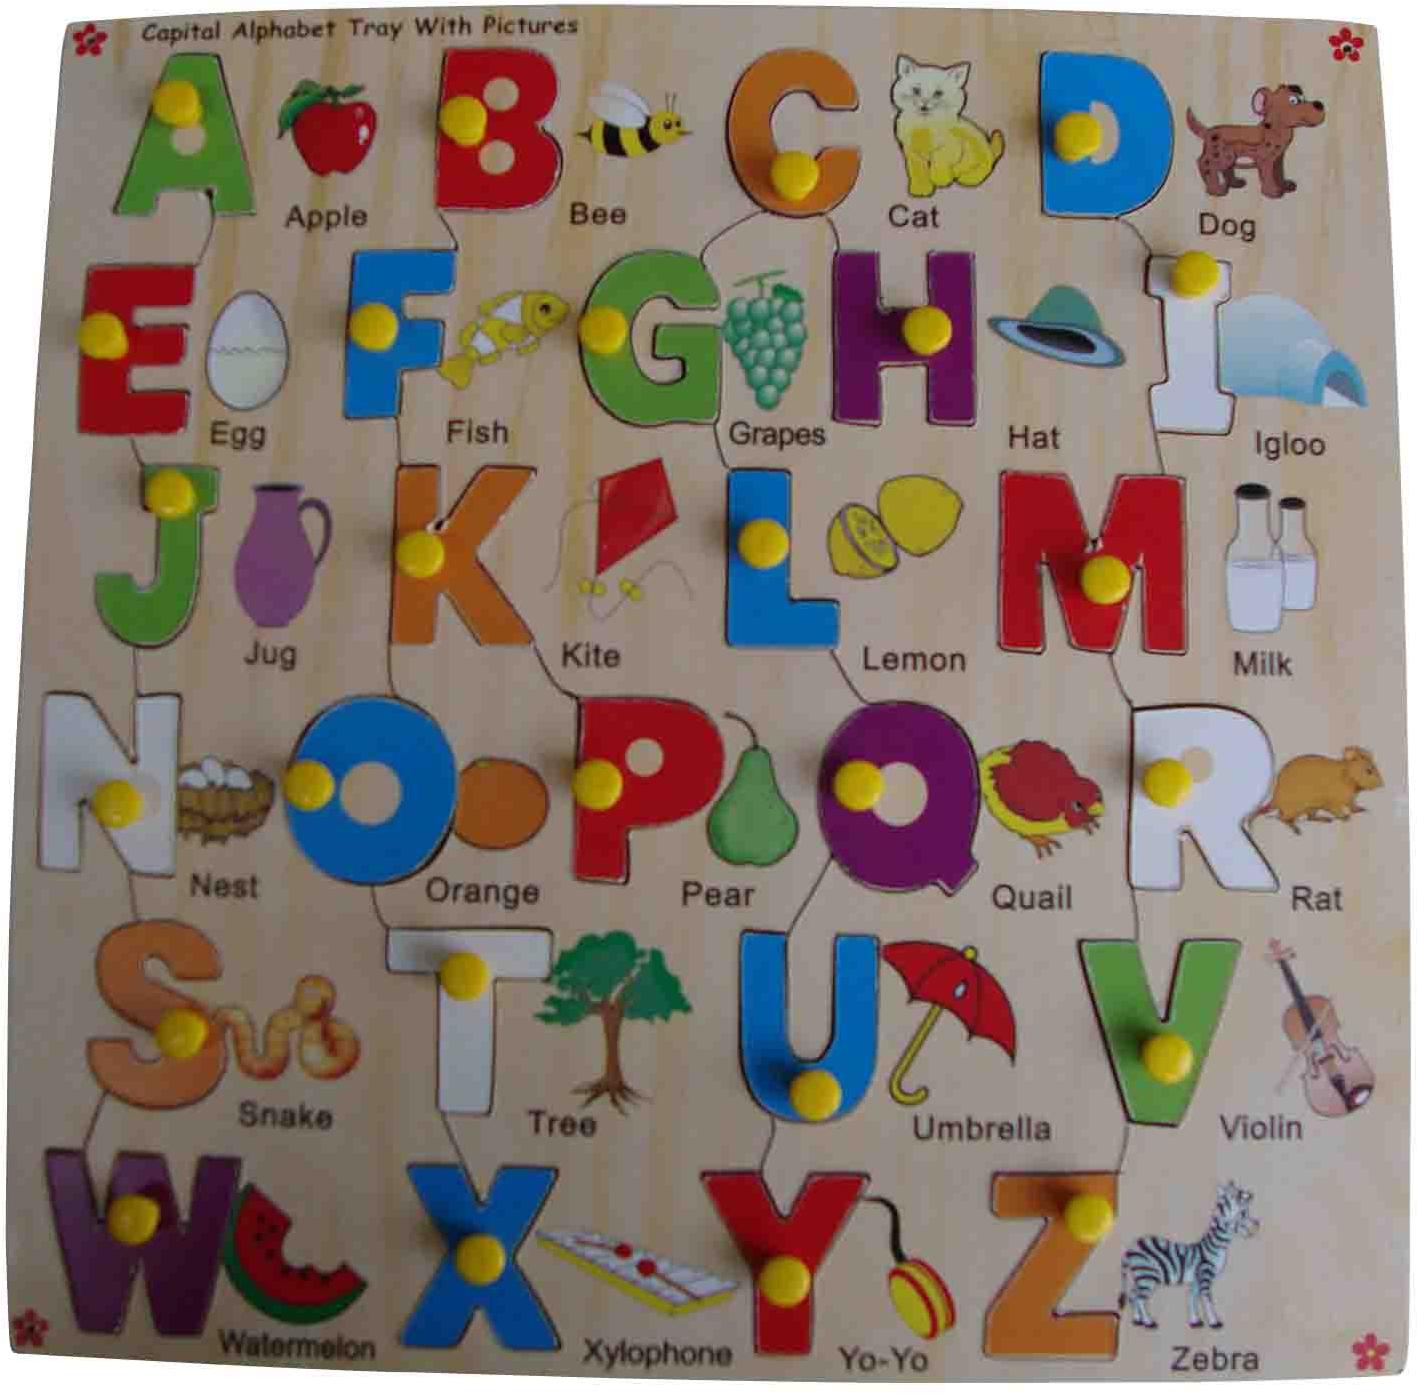 Capital Alphabet Picture Tray with Knobs